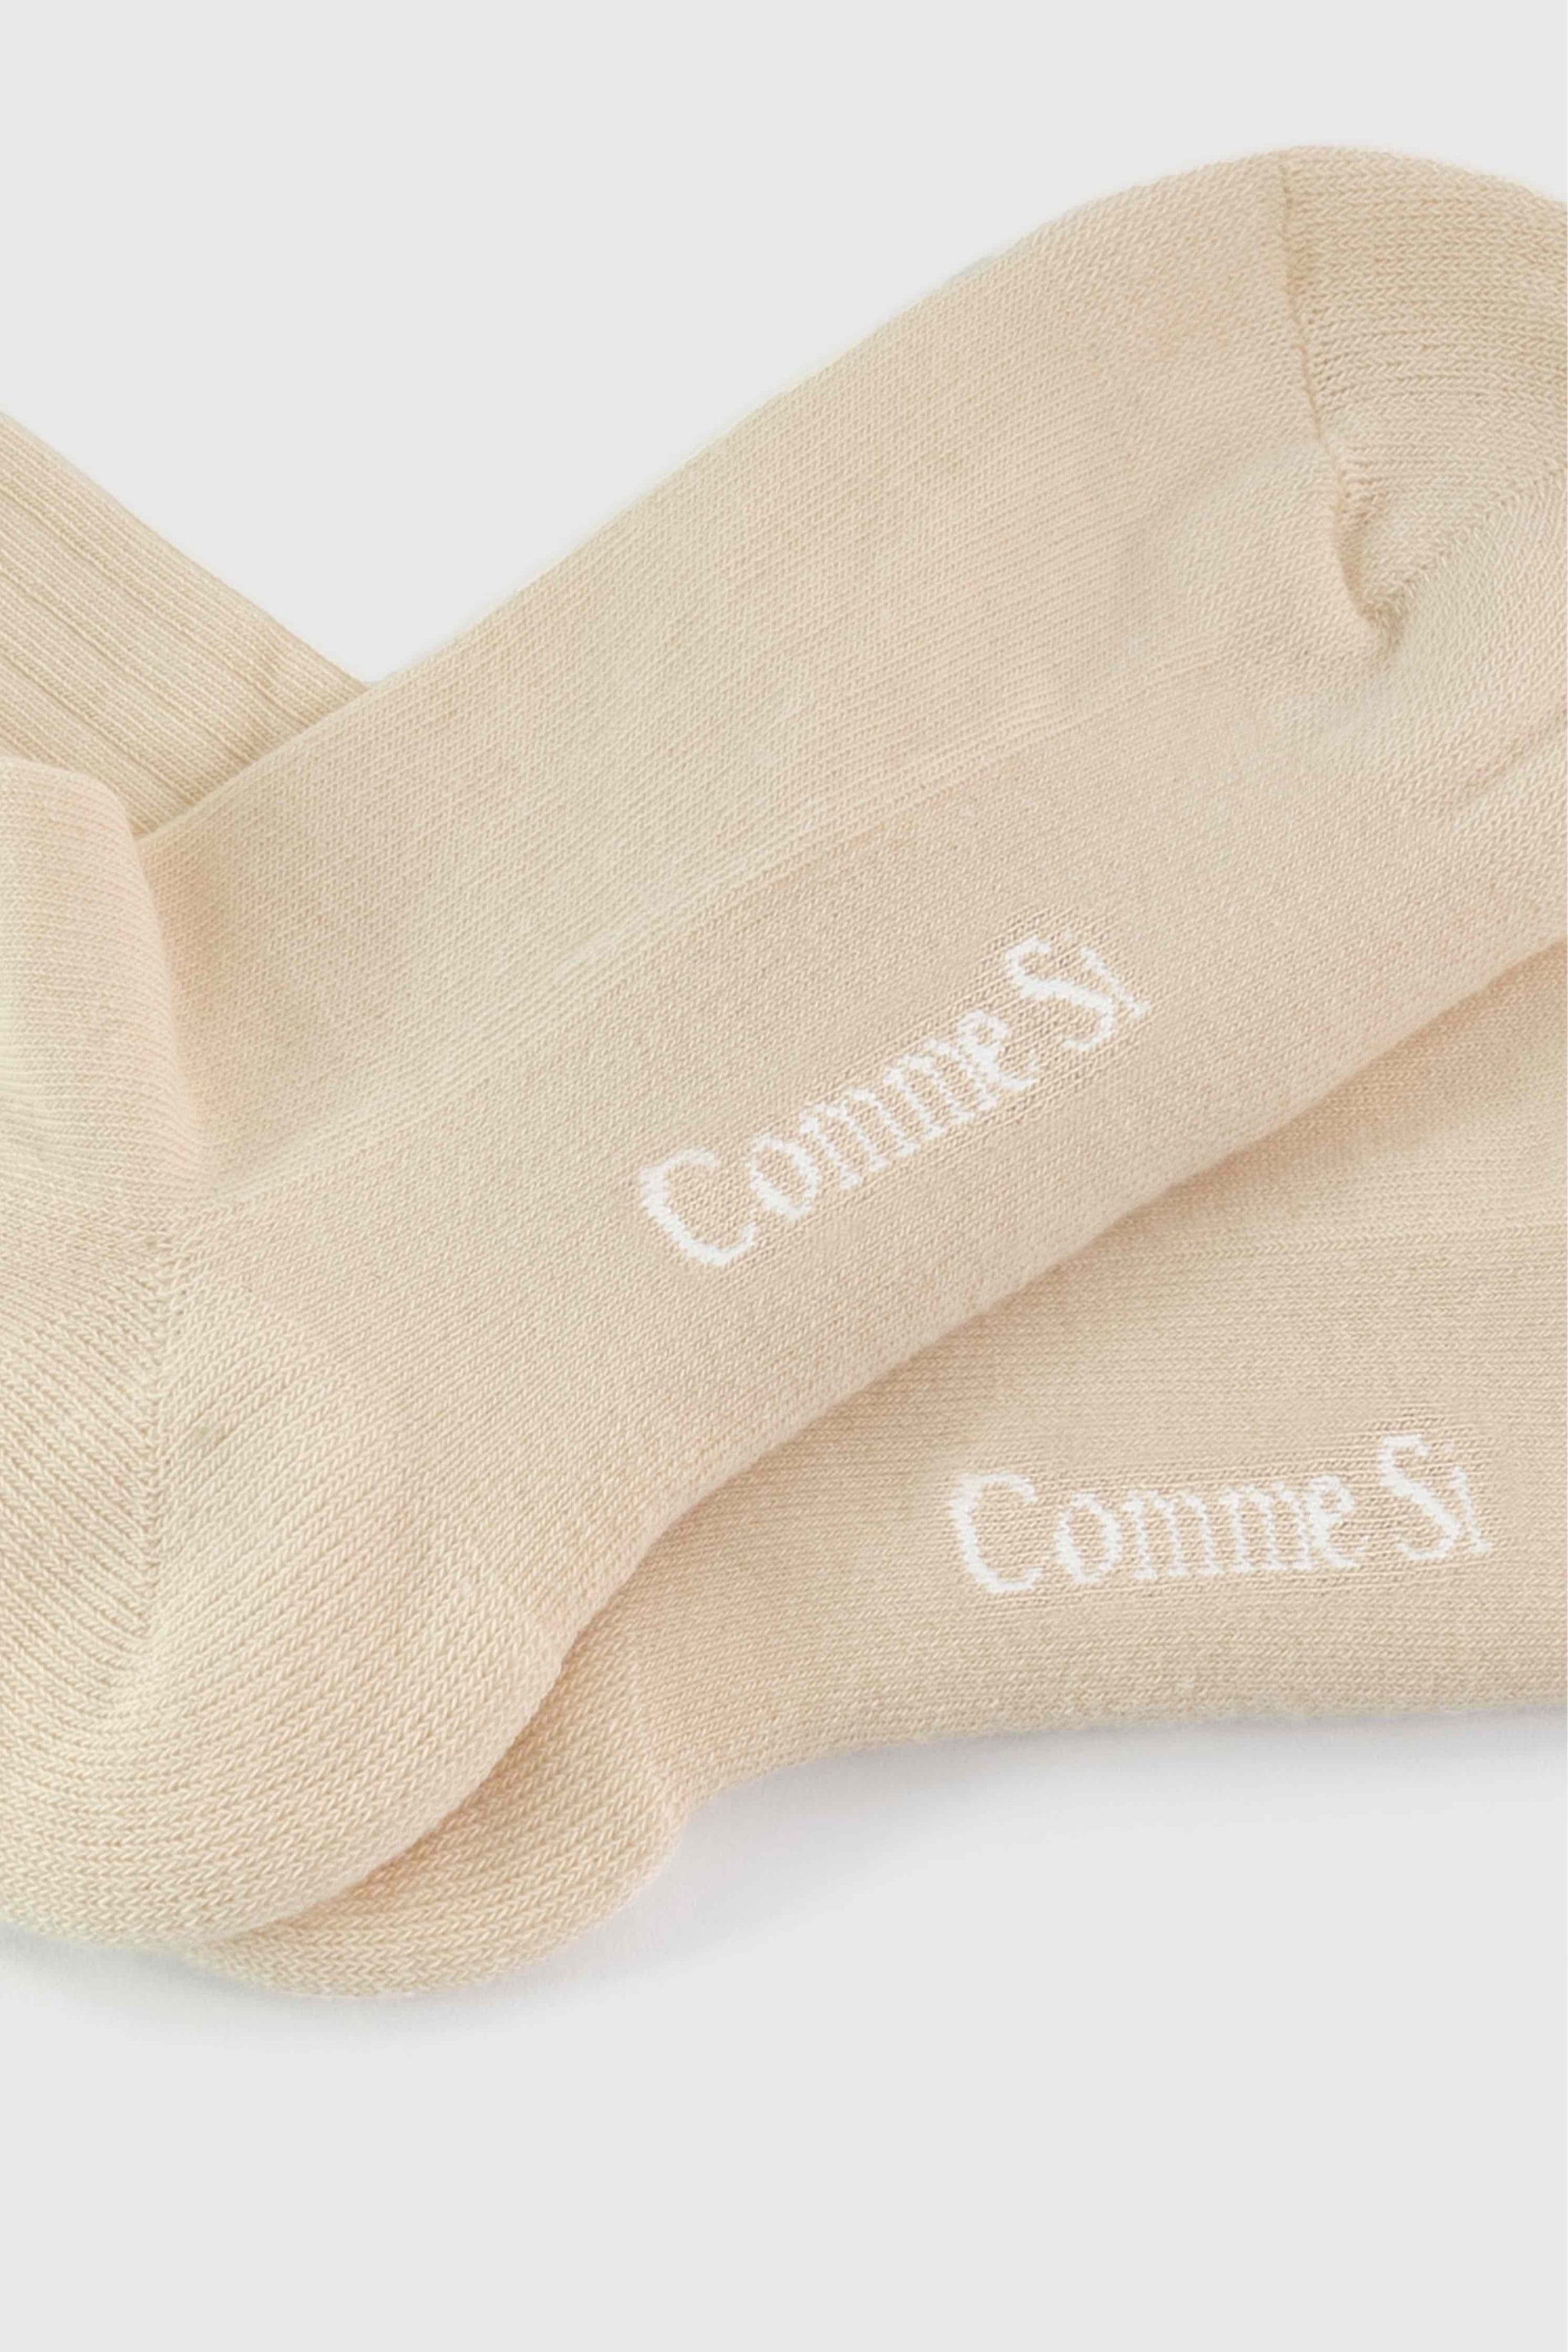 Footbed detail, The Everyday Sock in Biscuit, made with Organic Egyptian Cotton, by Comme Si